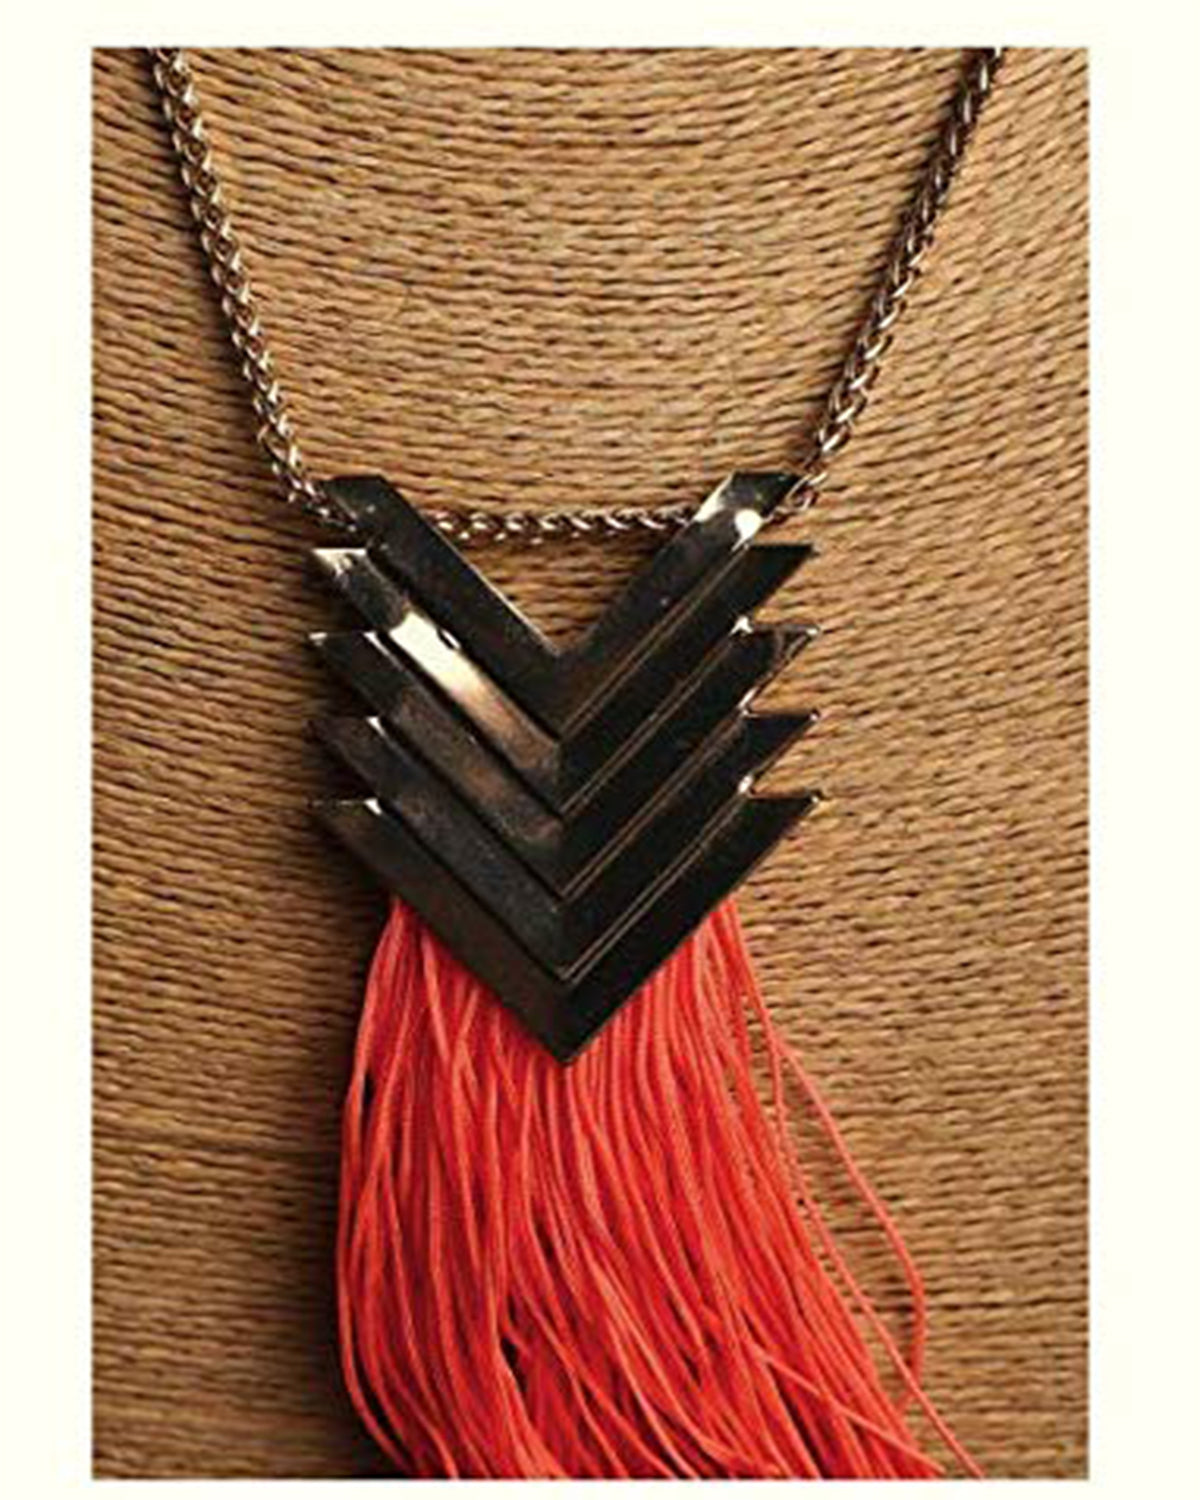 Grey Arrow Design Pendant Necklace with Hanging Tassels Jewellery for Women - Coral Tree 